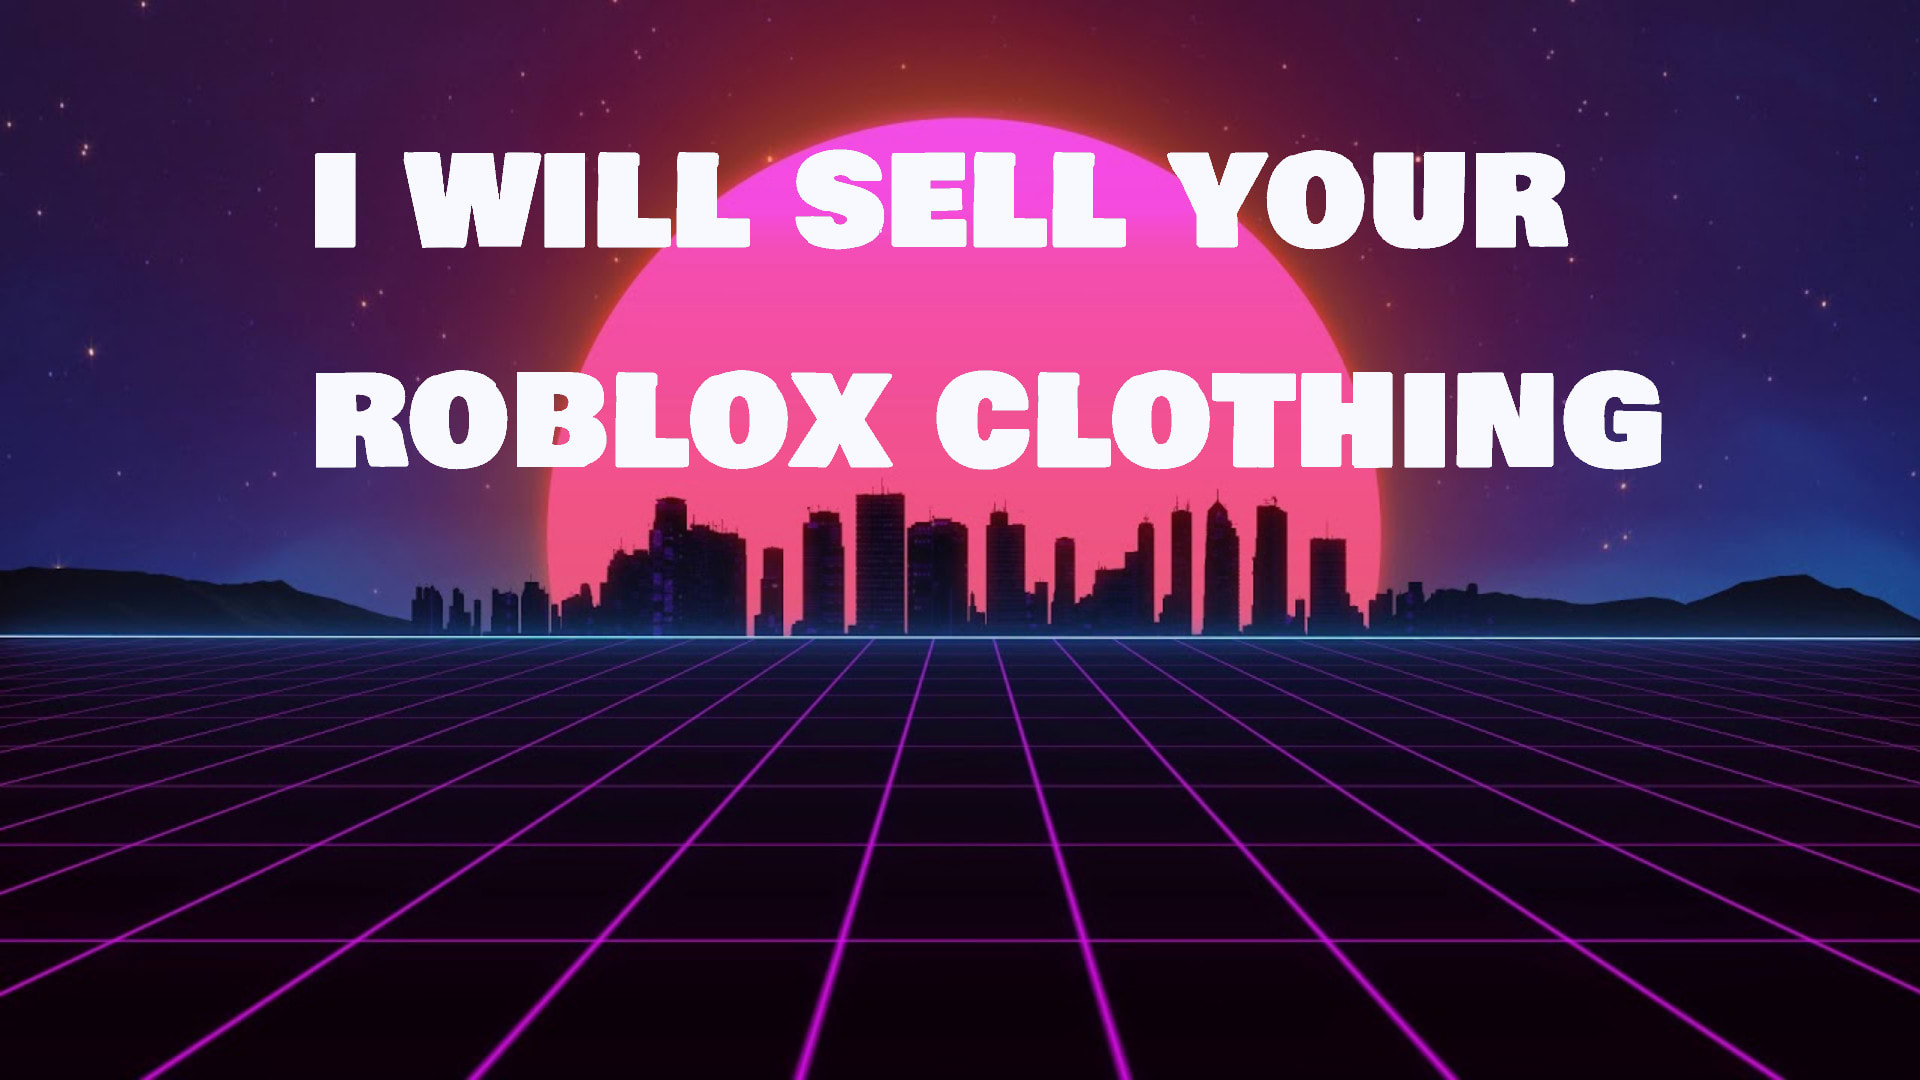 Sell Your Roblox Clothing To My Group With 5k Members And Pay The